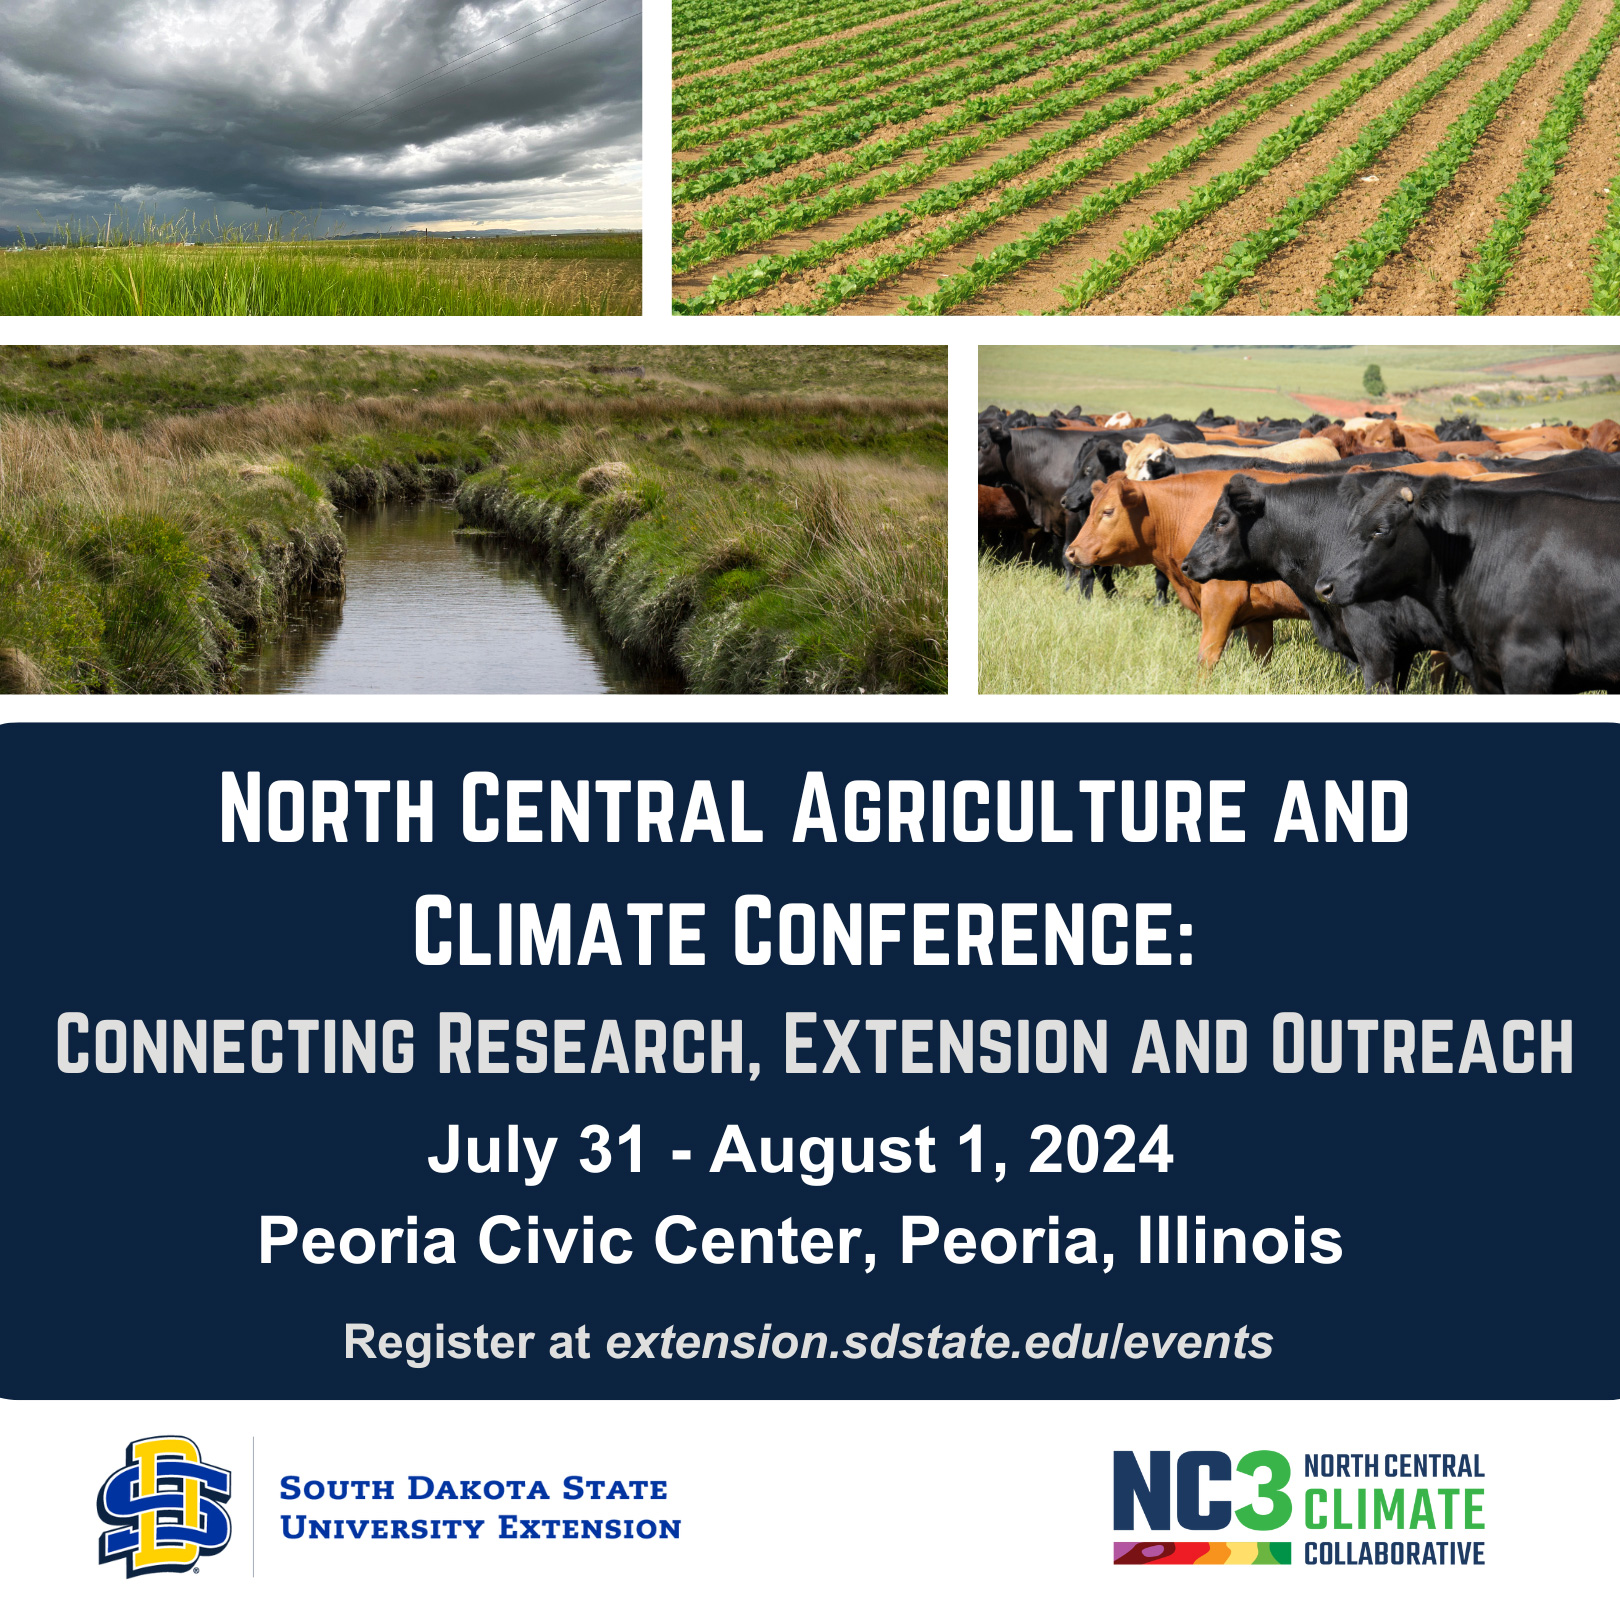 North Central Agriculture and Climate Conference